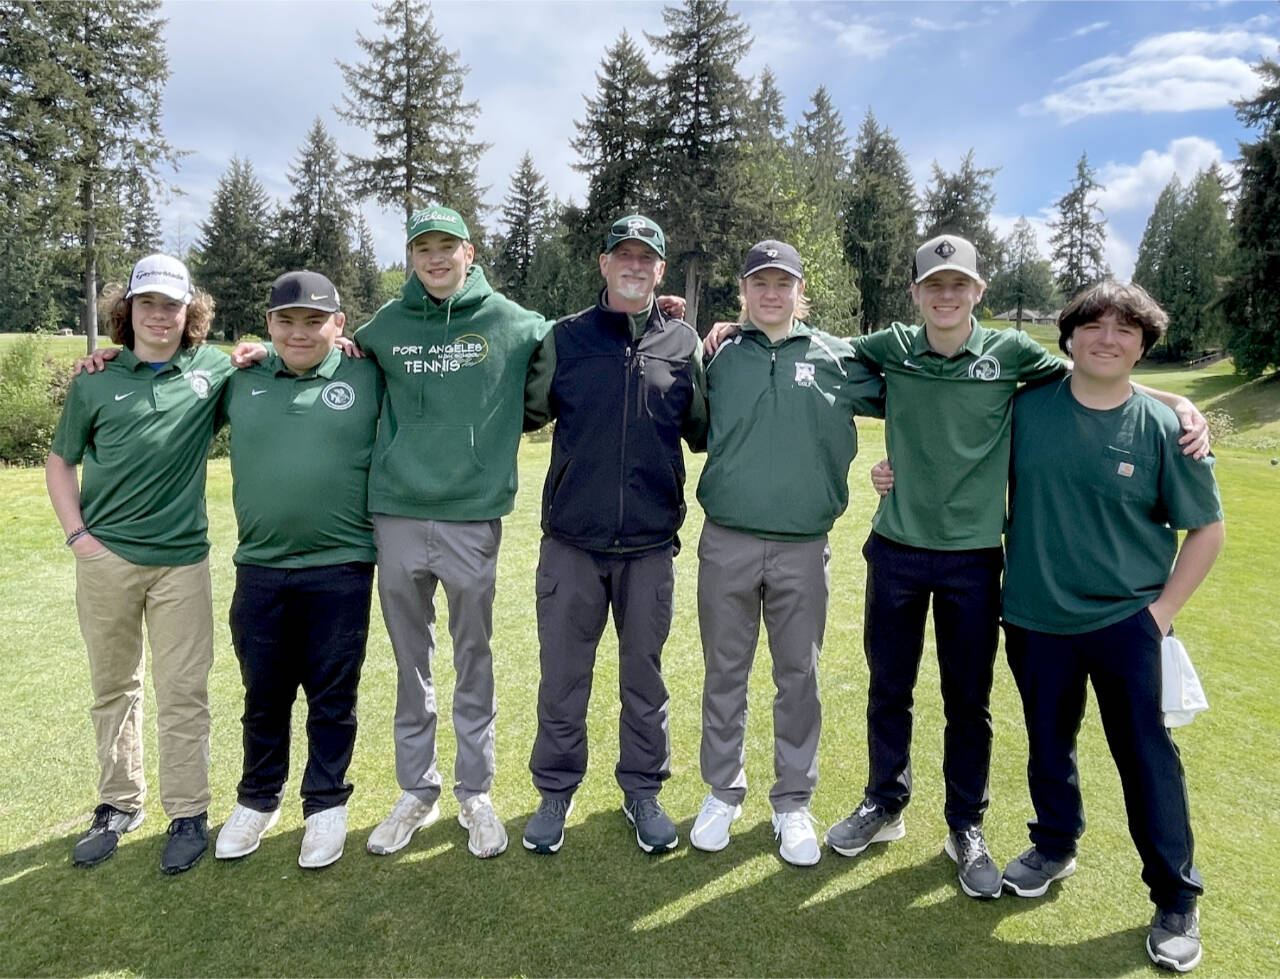 The Port Angeles boys golf team will send at least four members to the state 2A tournament at Liberty Lake. From left, Sky Gelder, Kolby Charles, Reid Schmidt, Bob Anderson, Nate Anderson, Austin Worthington and Max Gelder. Not in the photo is Cale Wentz. (Port Angeles boys golf)